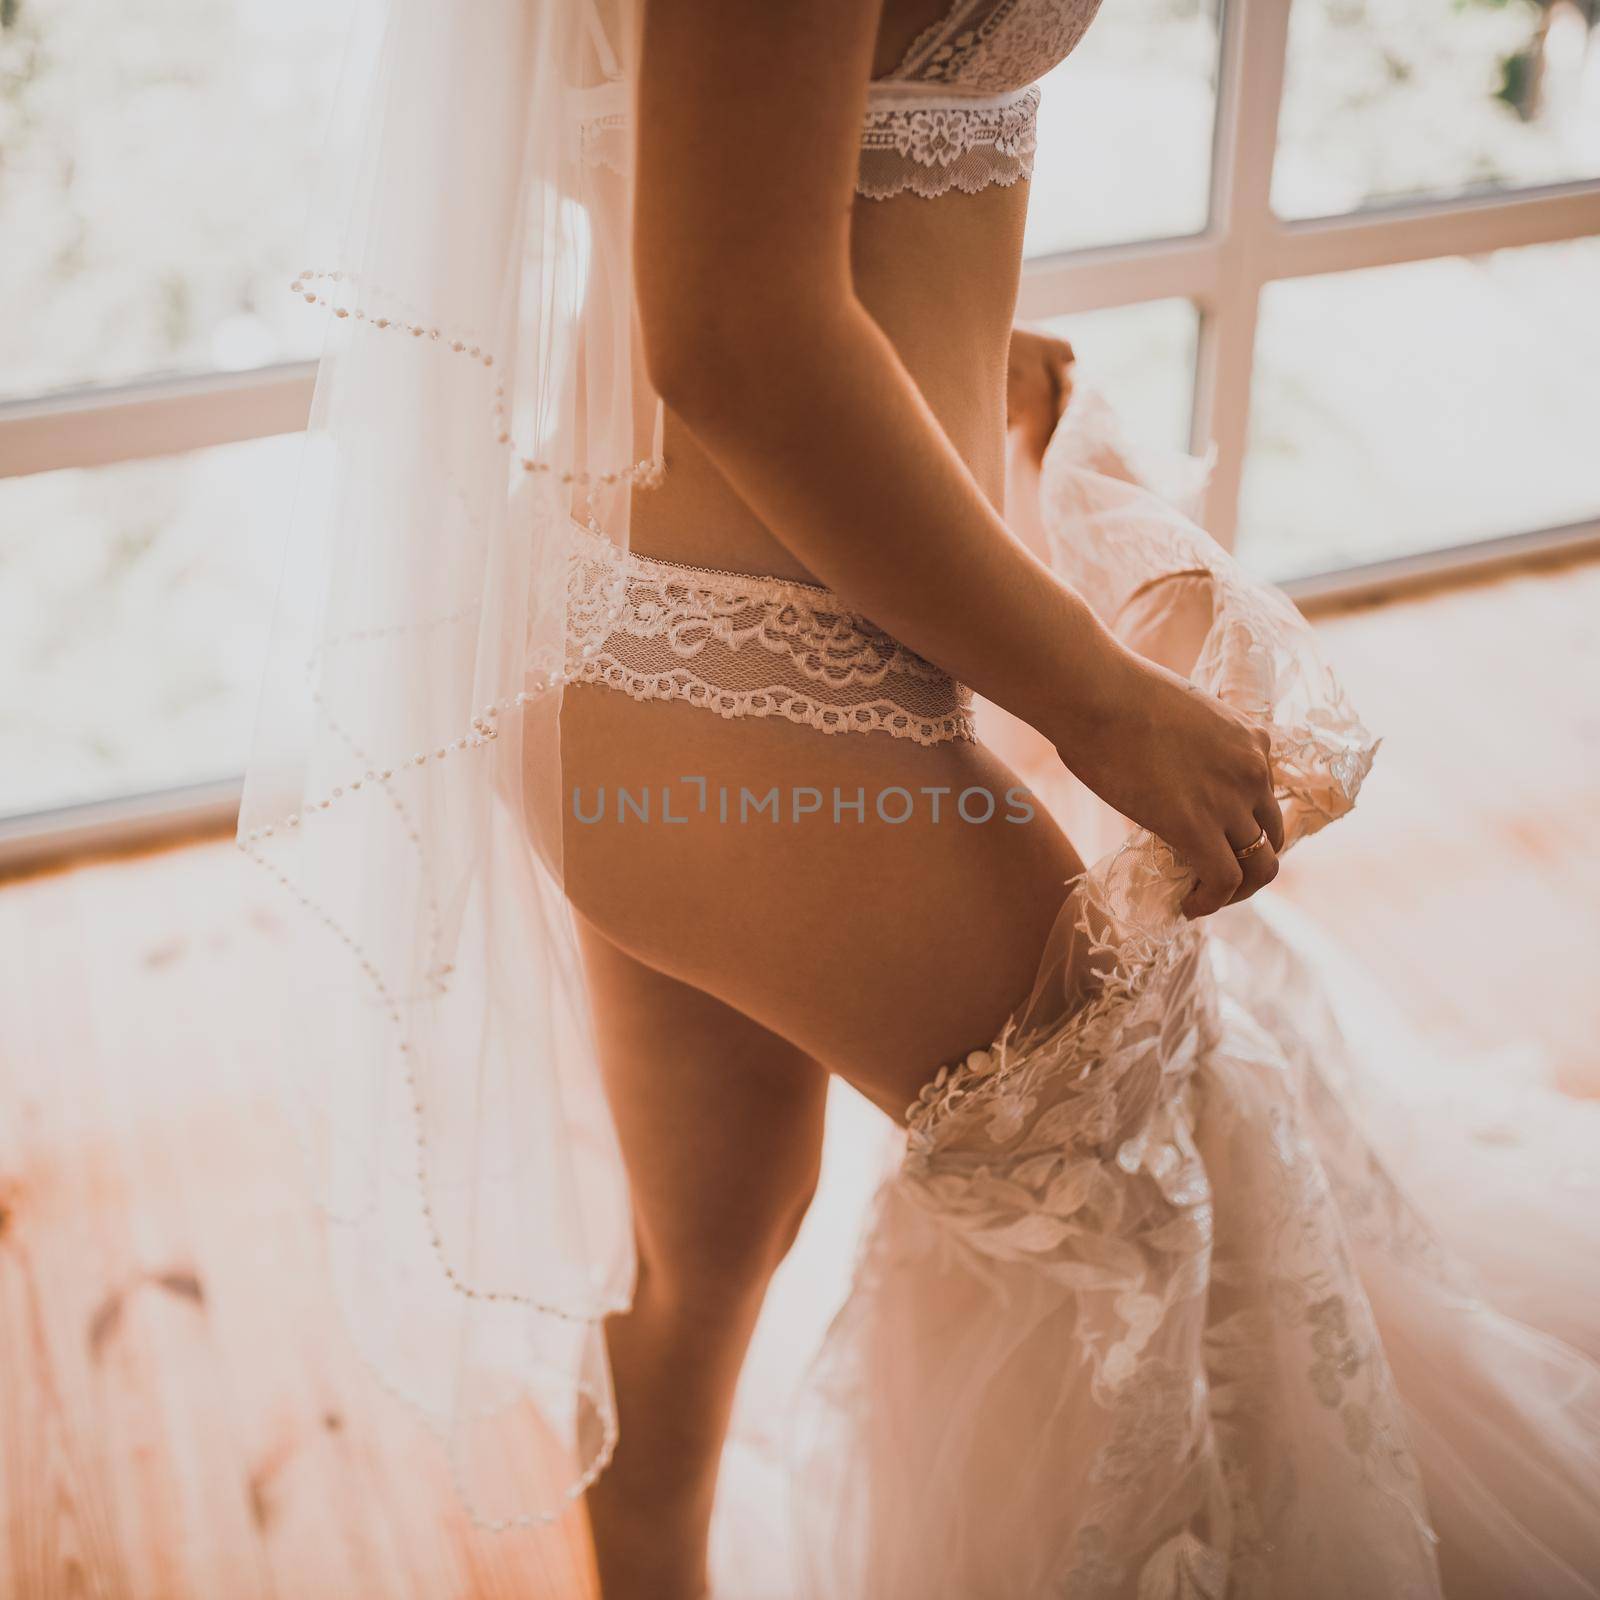 European skinny bride in lingerie puts on a wedding dress by AndriiDrachuk